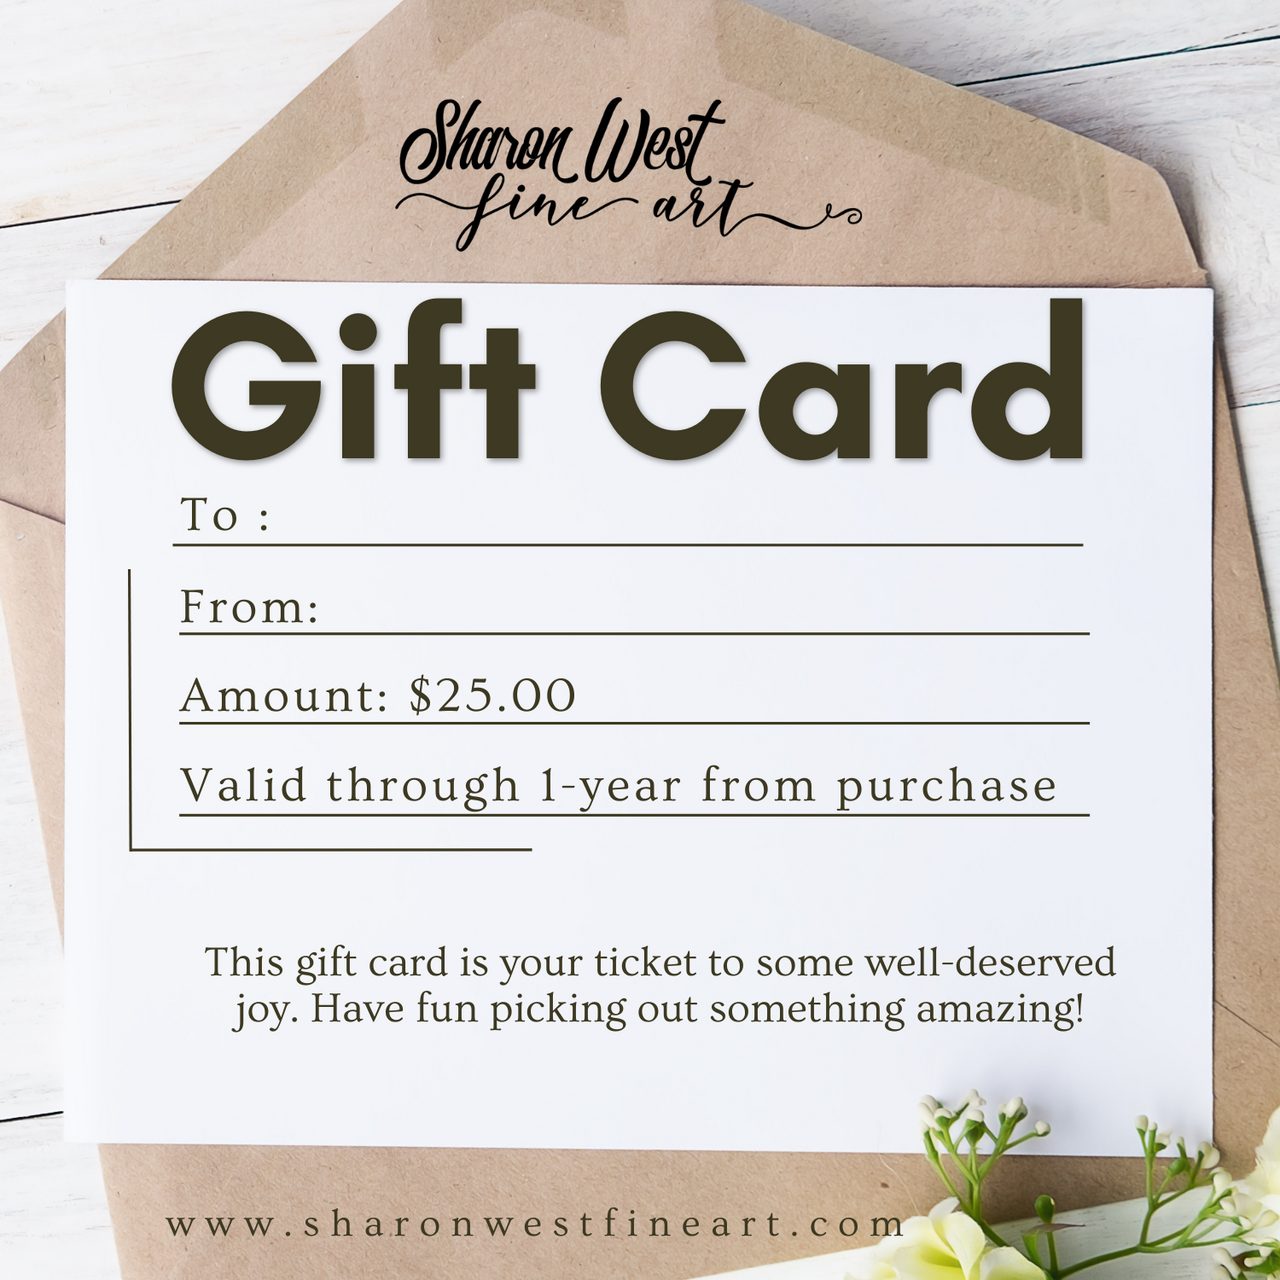 New! Gift Card to Sharon West Fine Art